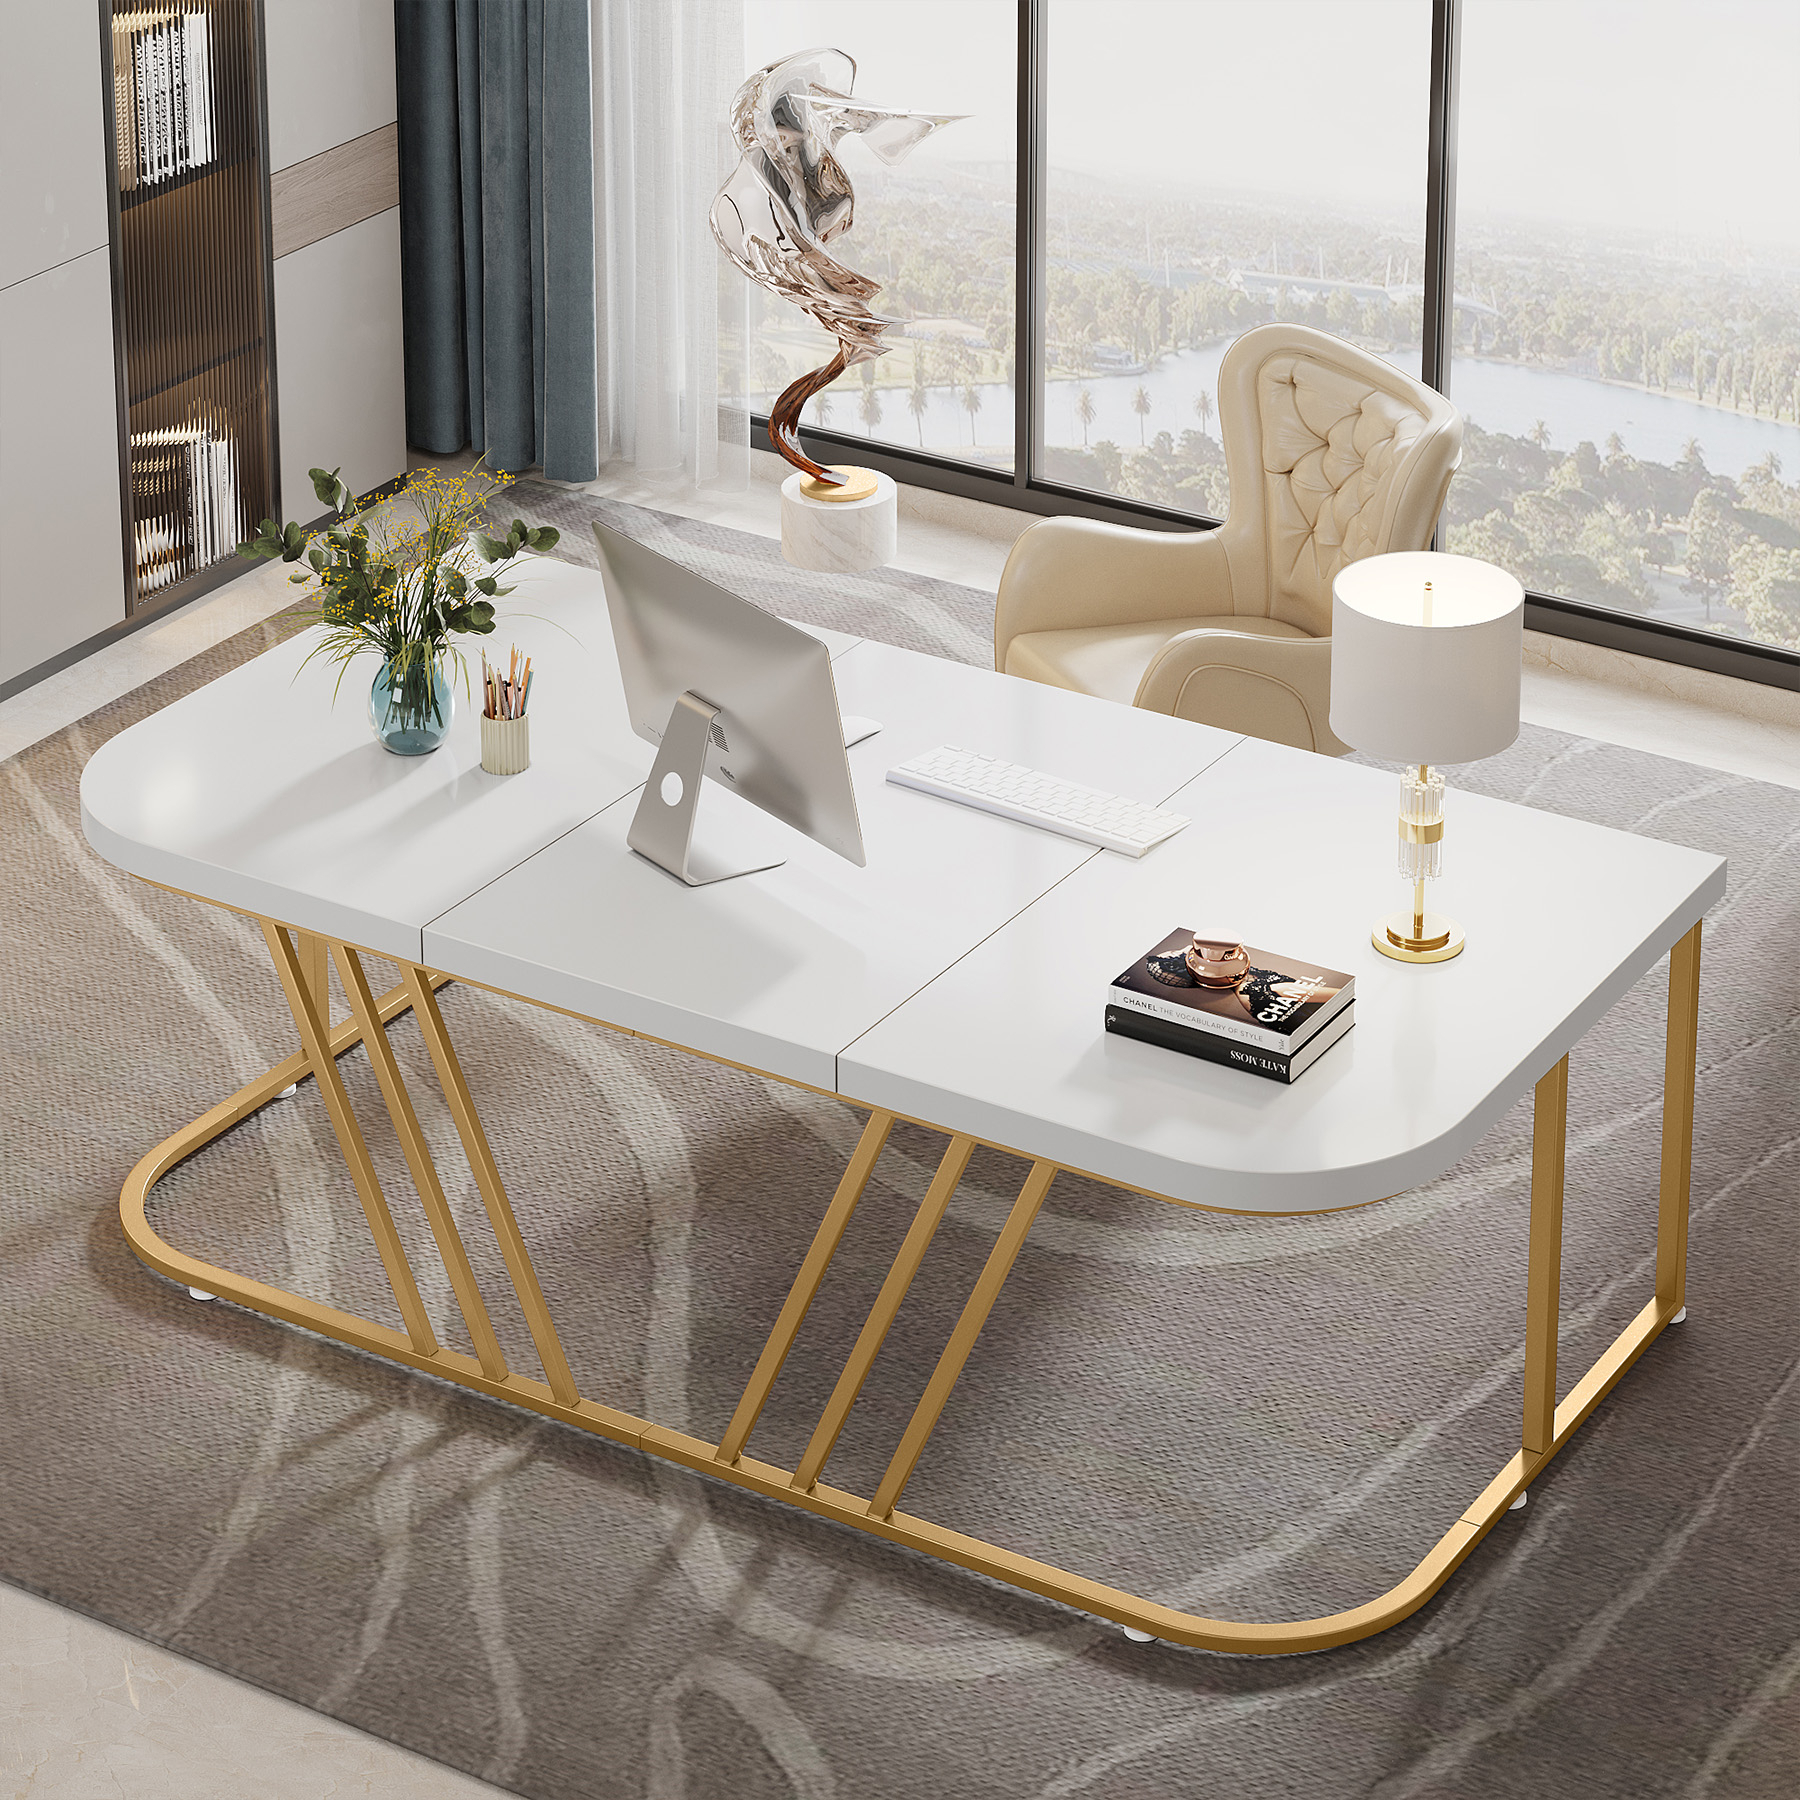 Tribesigns Modern Dining Table For 6-8 People, 70.8 Inches Long White Dining Room Table For Kitchen, Wood Kitchen Table With Gold Metal Legs